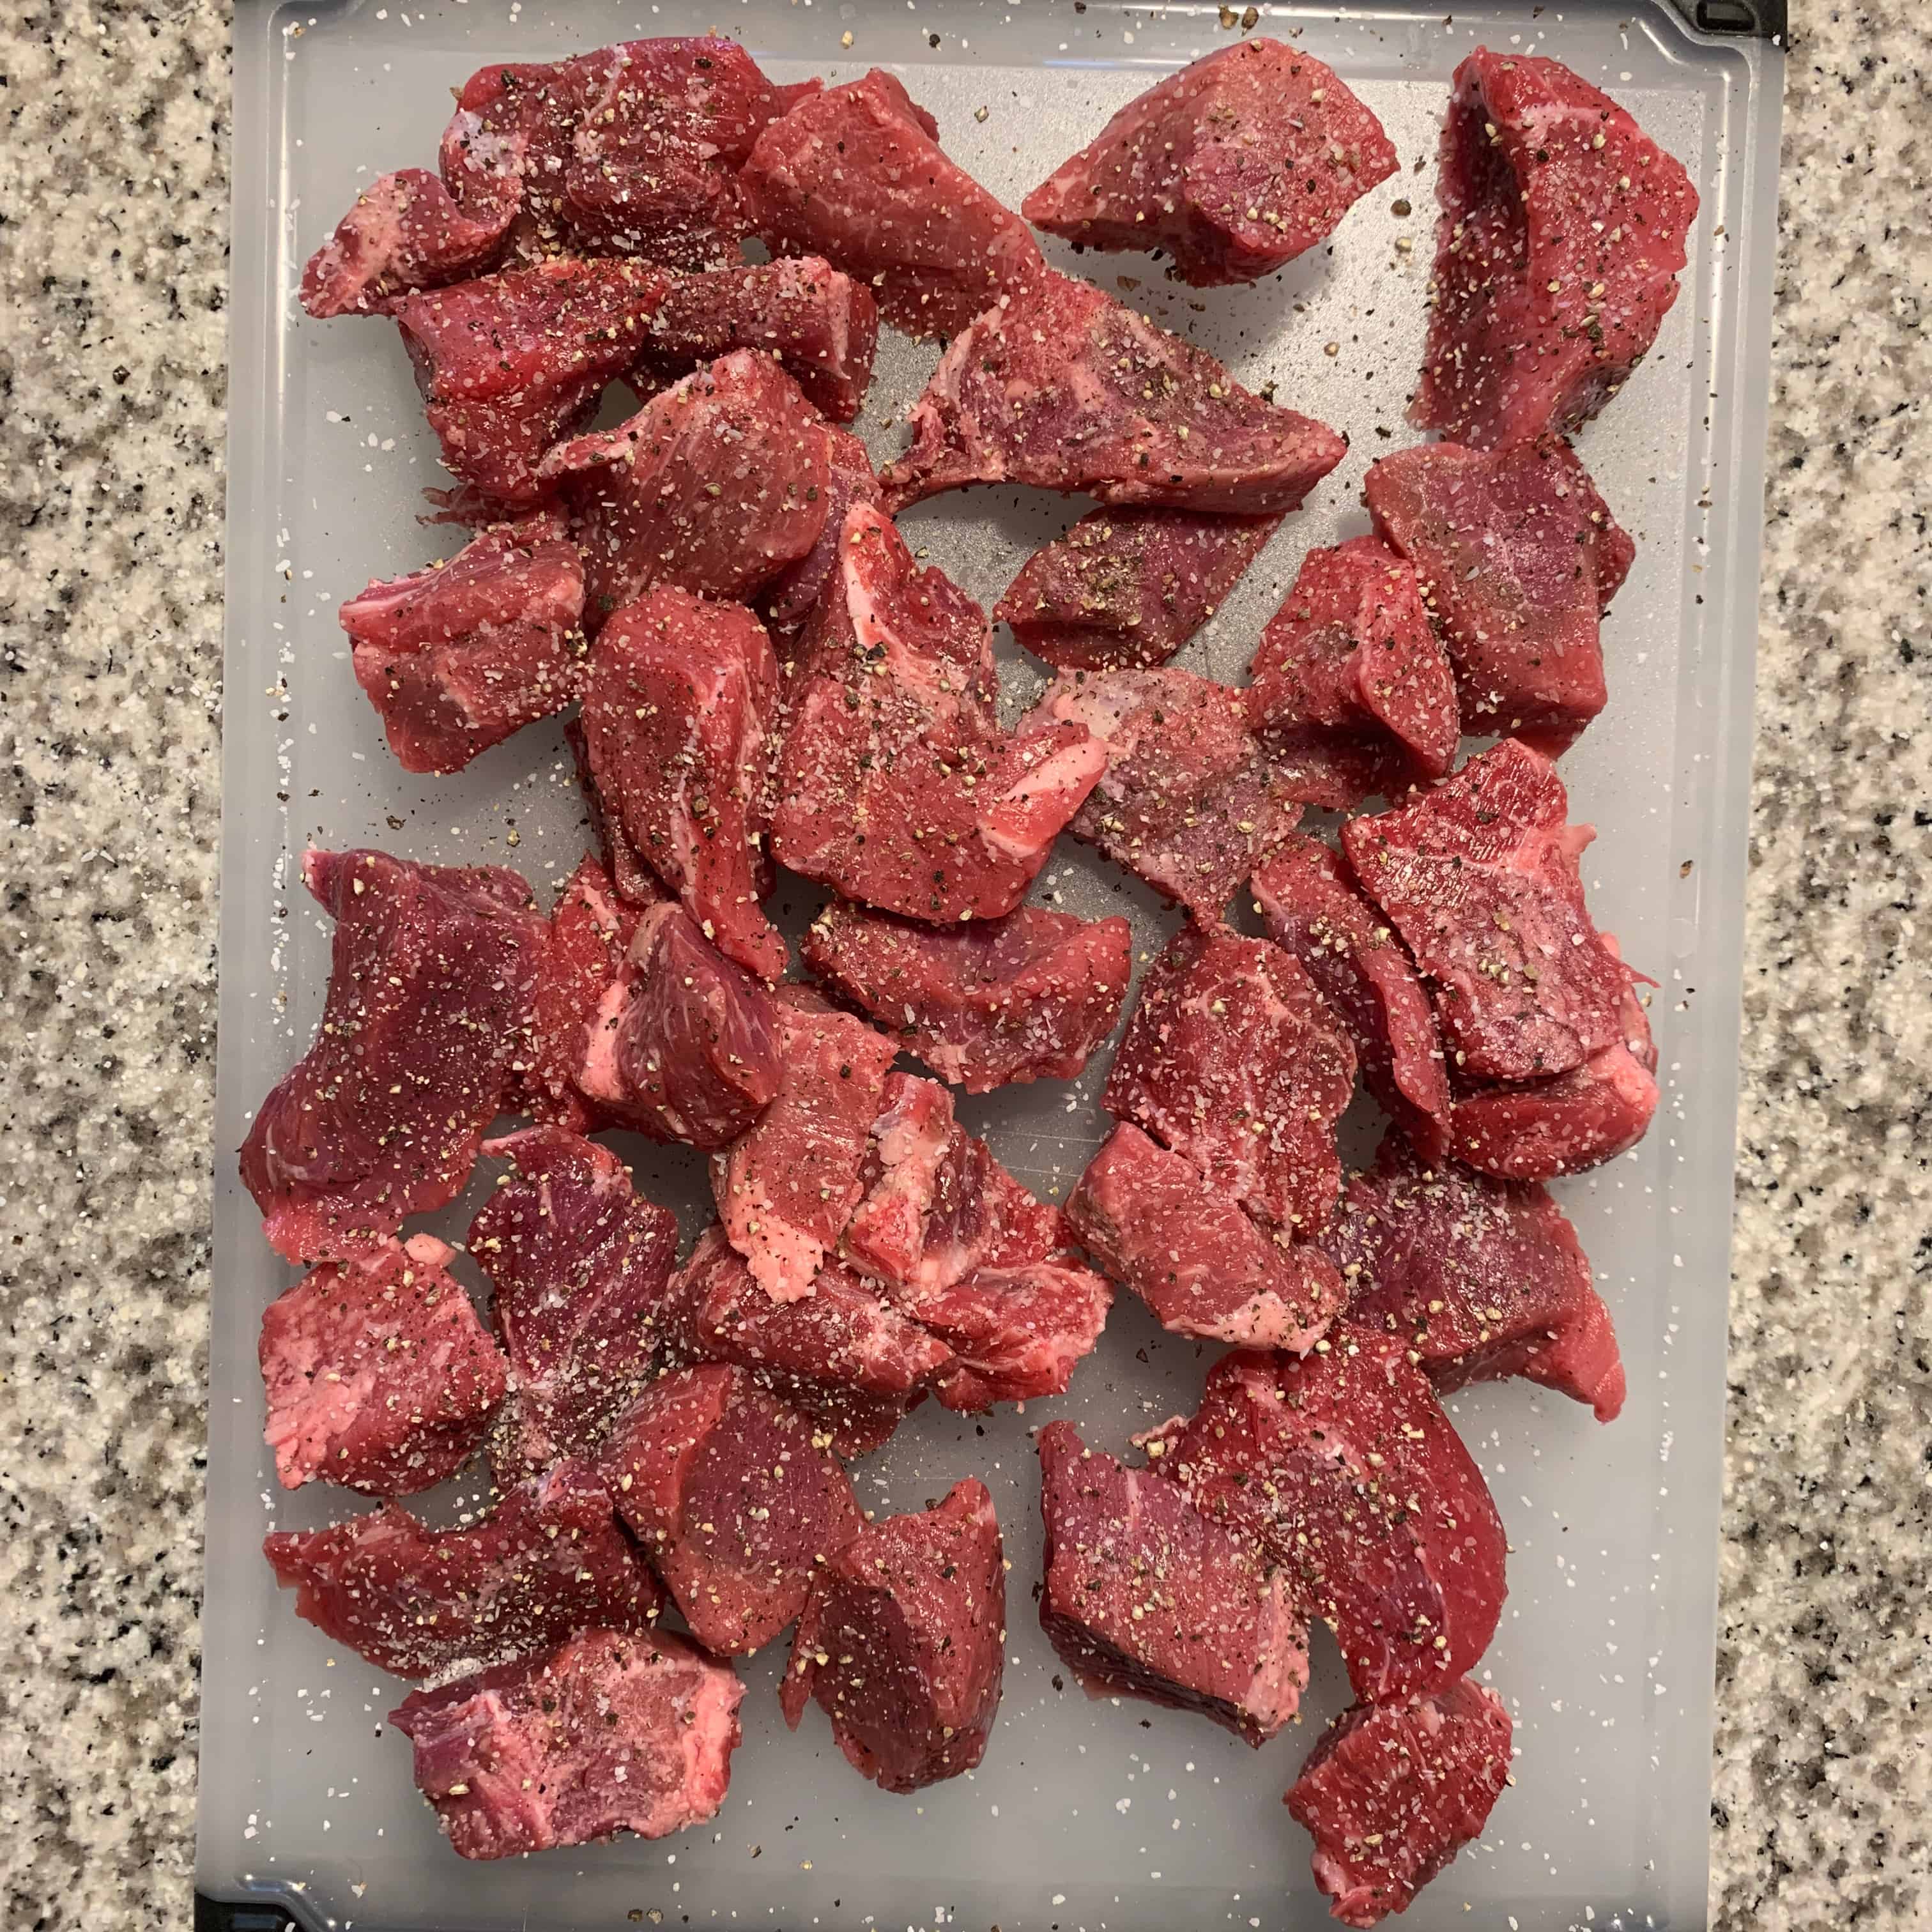 salt and pepper on the stew beef